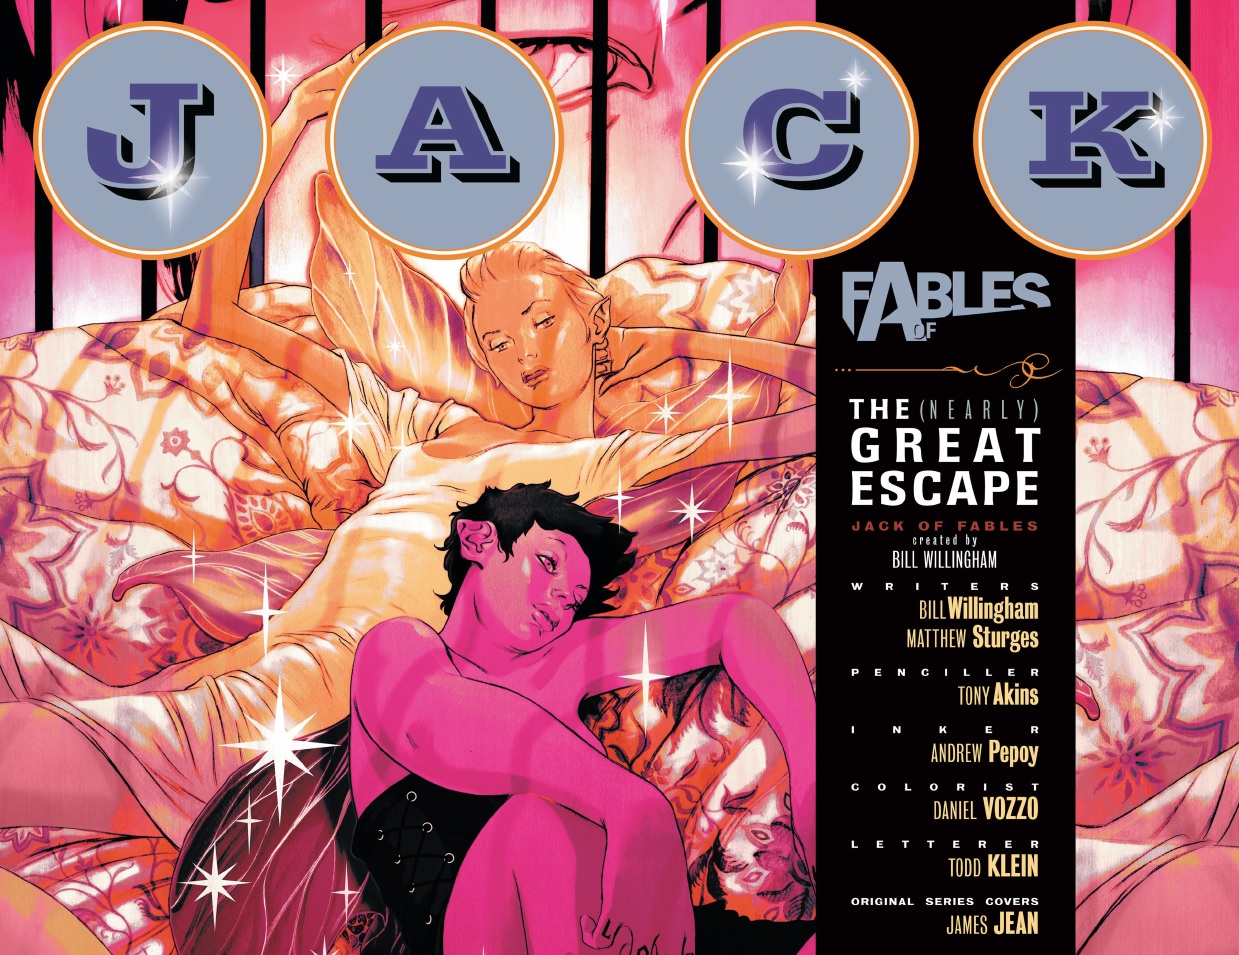 Jack of Fables Vol.1 – The (Nearly) Great Escape #1 The Long Hard Fall of Hollywood Jack